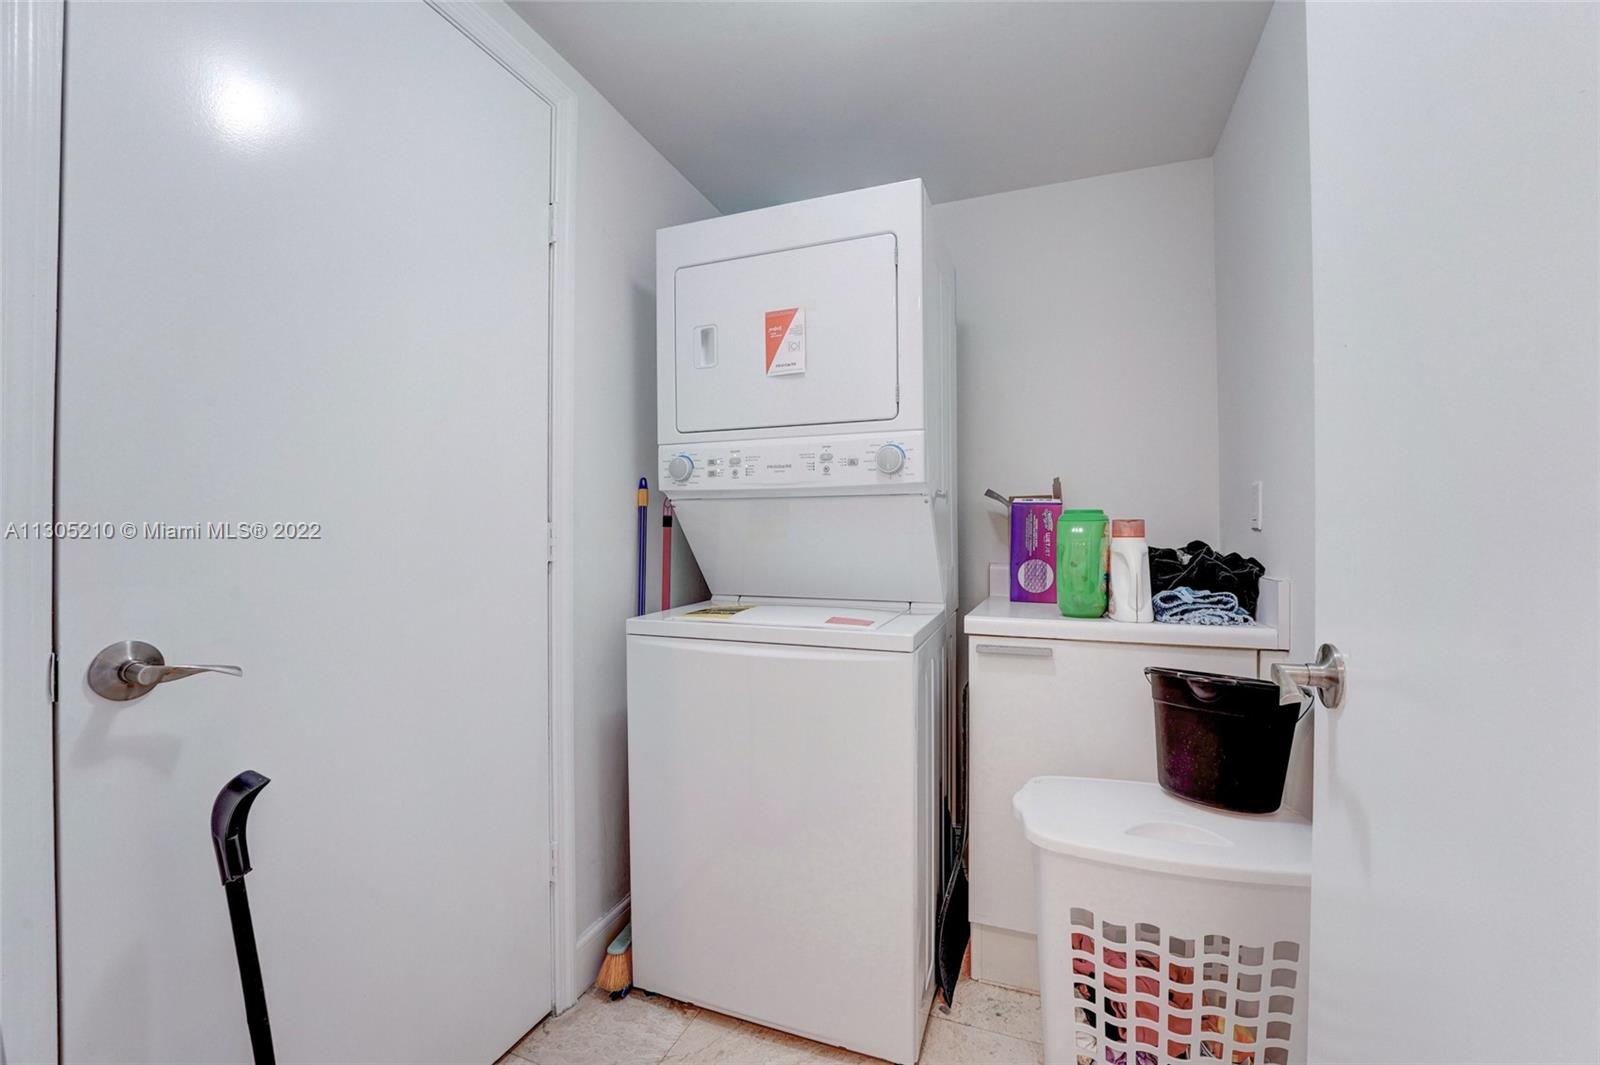 Laundry room with stackable washer and dryer